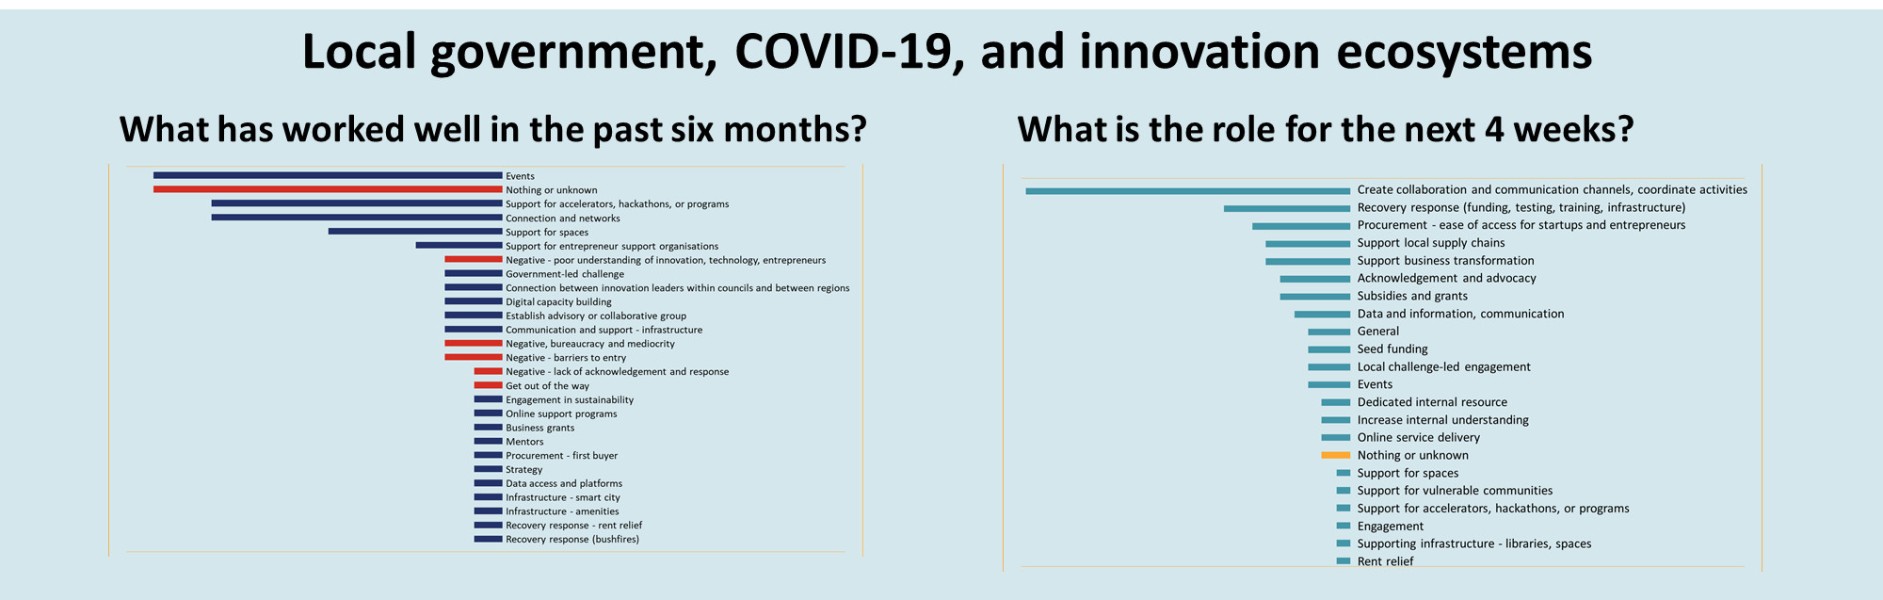 The role of local government in entrepreneur and innovation support, as seen through COVID-19 impacts